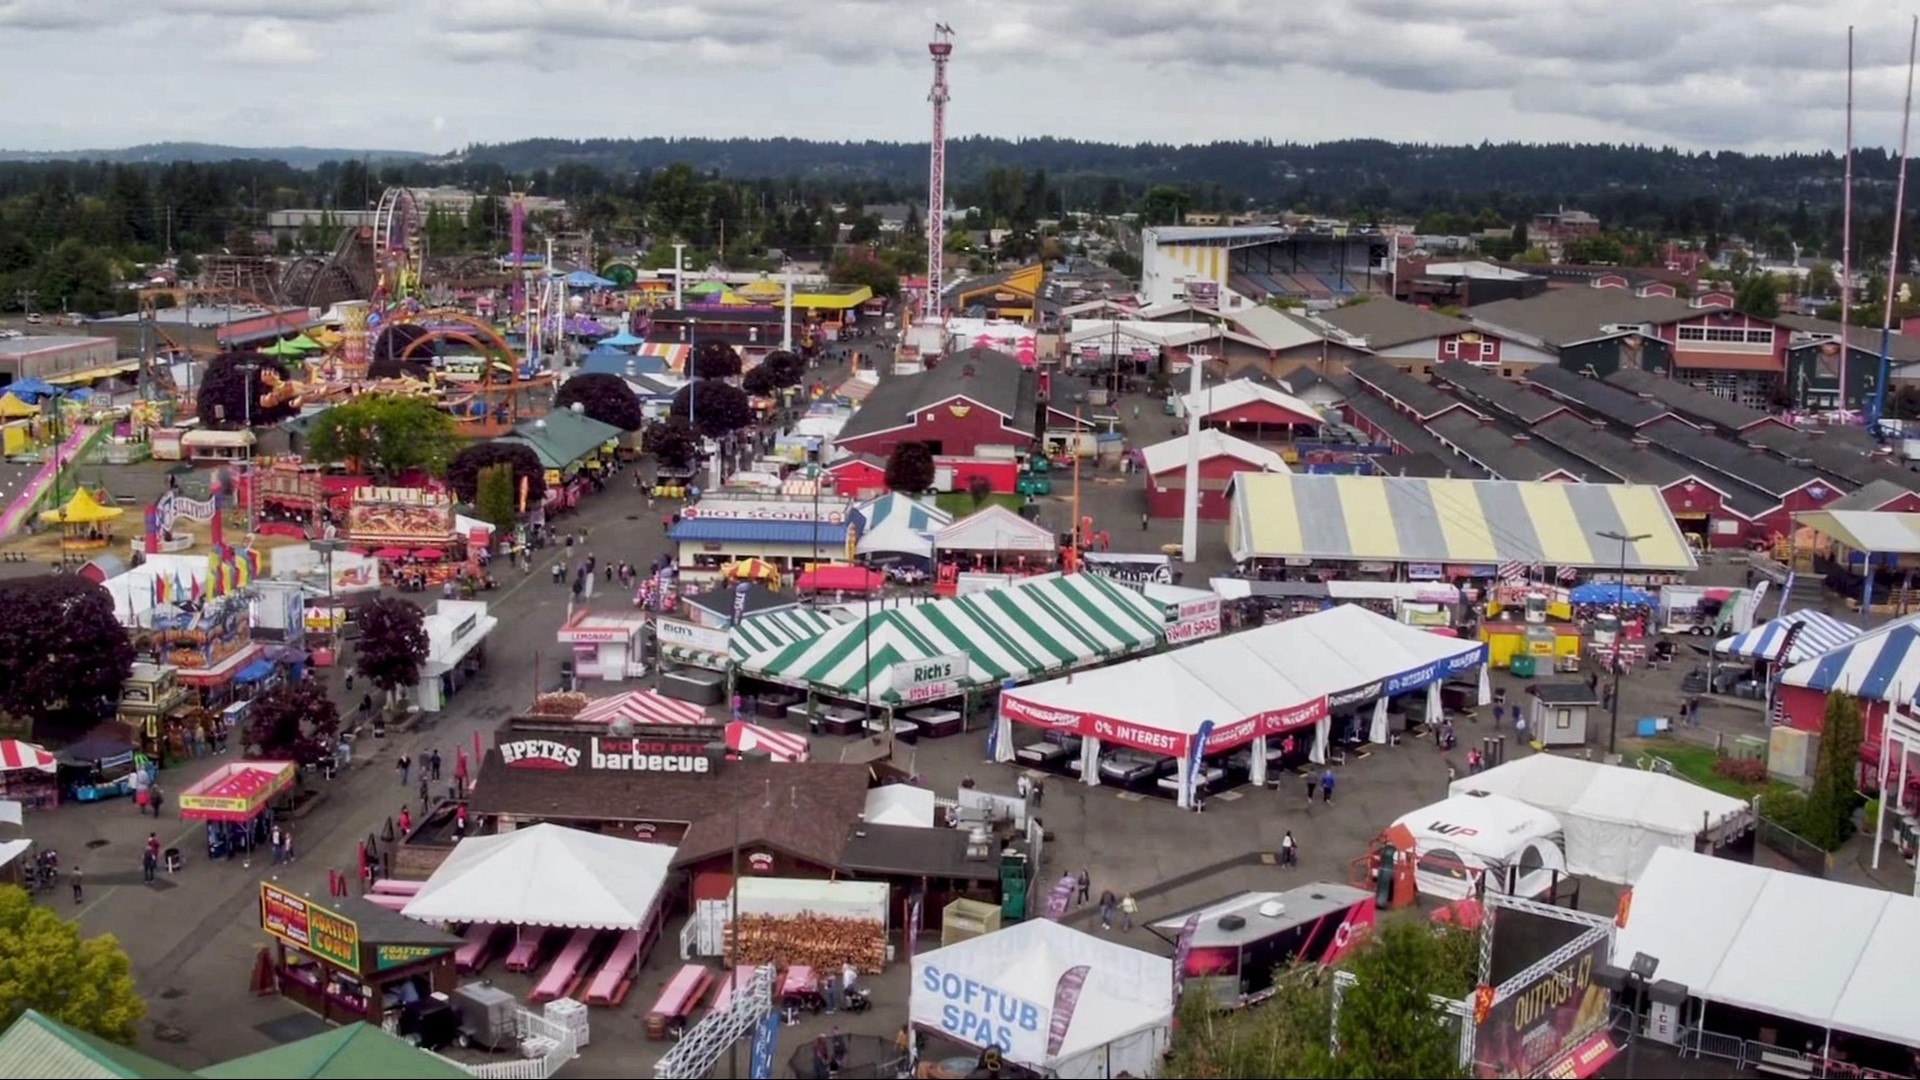 The Washington State Fair returns to the Puyallup Fairgrounds Friday